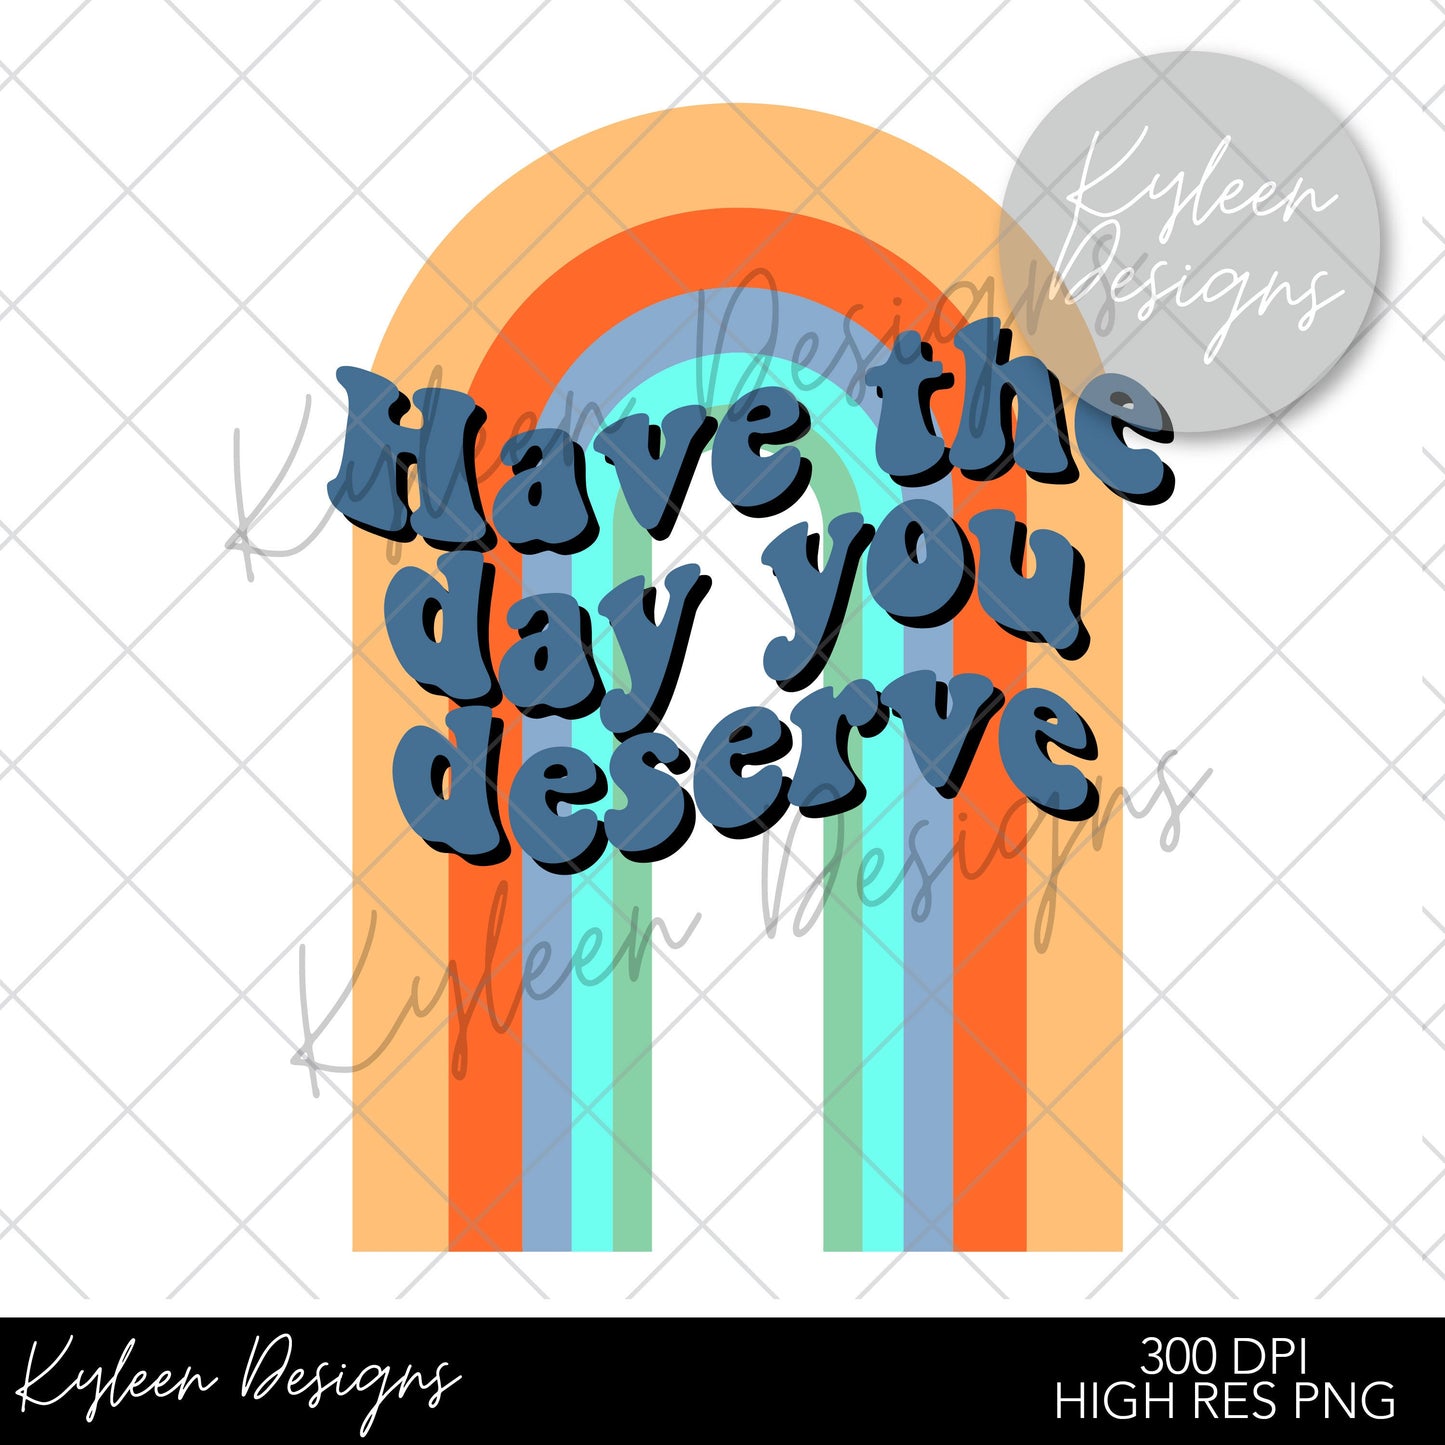 Have the day you deserve High RES PNG for coffee/beer glass